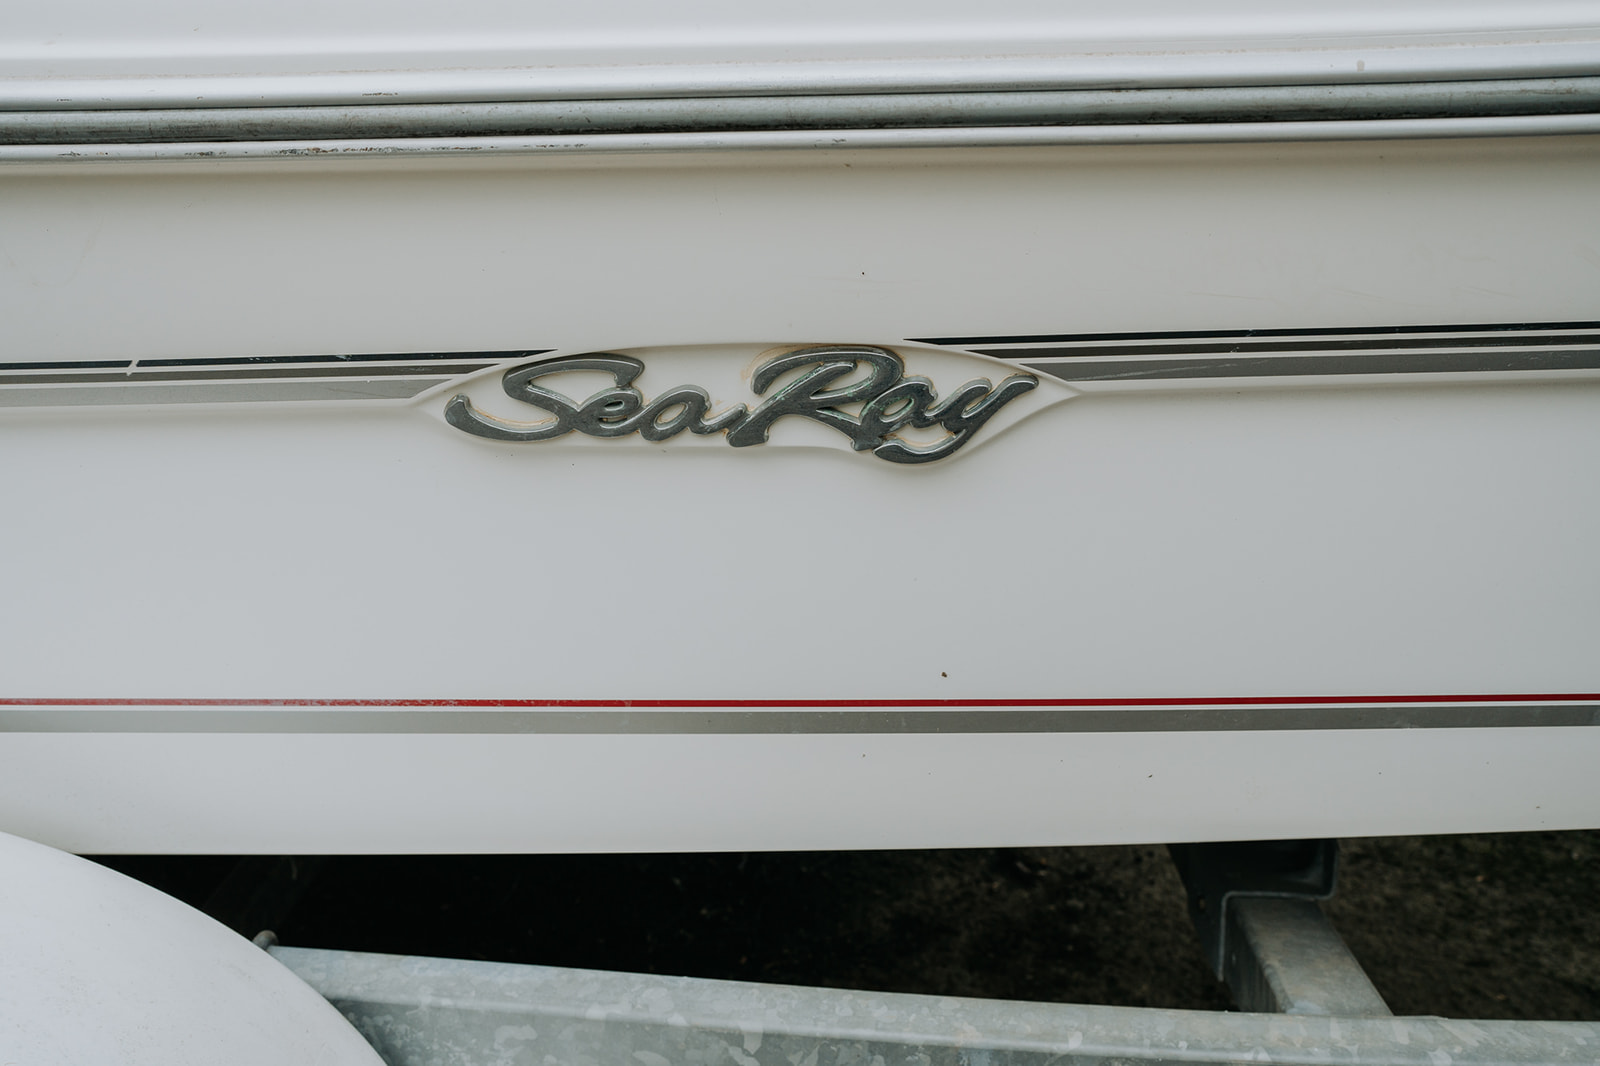 Power boat For Sale | 1991 Sea Ray 170 Bowrider in Asheville, NC